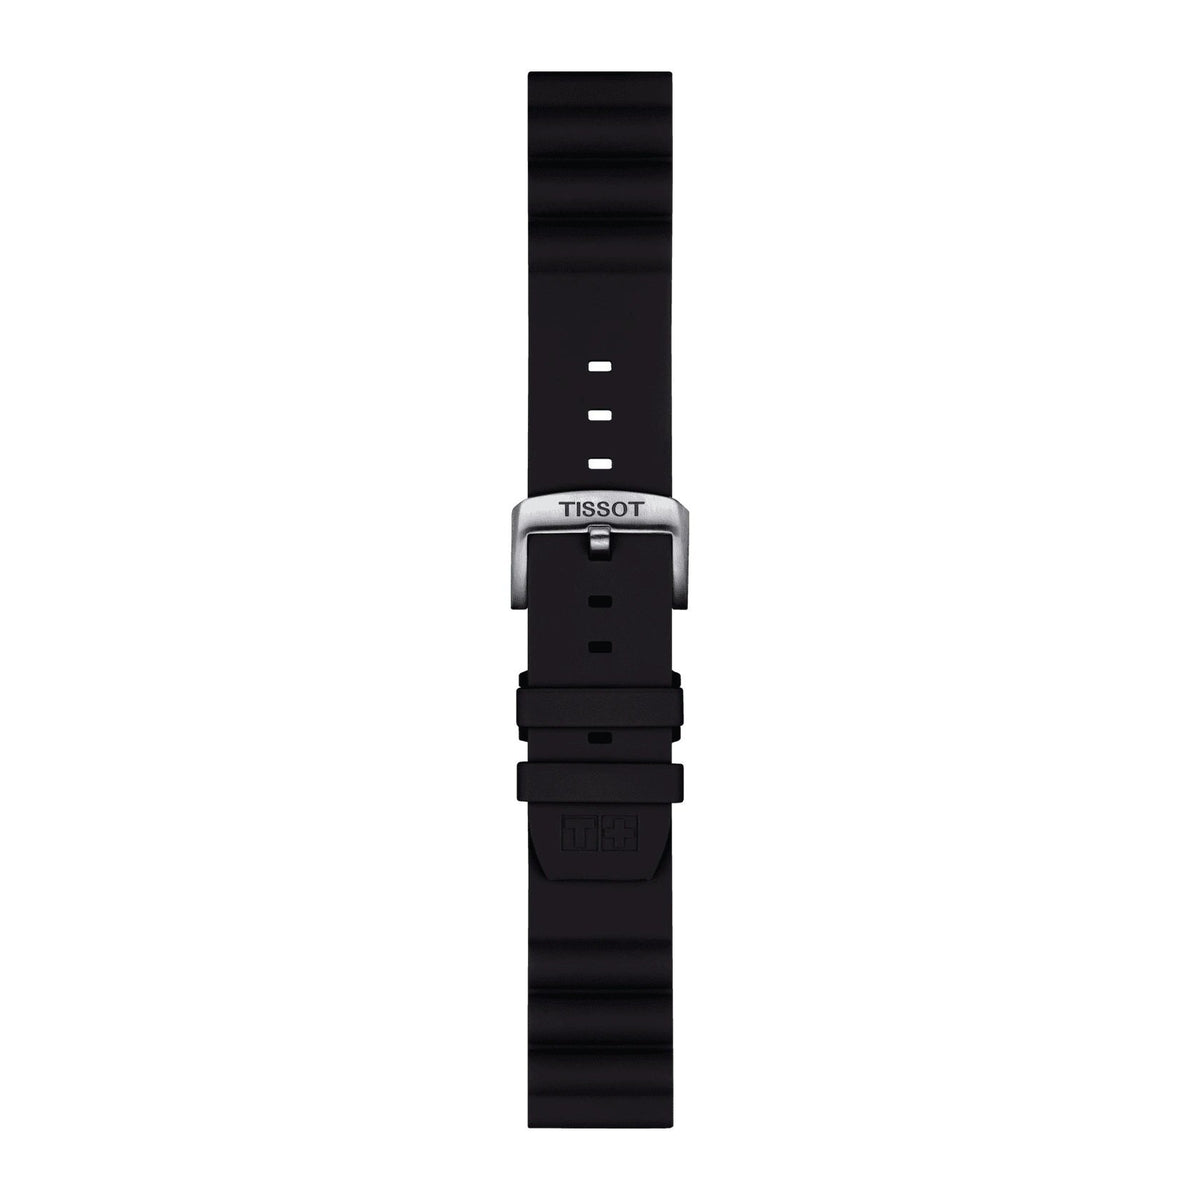 Official Tissot BLACK SILICONE strap ANSA 22 MM T852047179